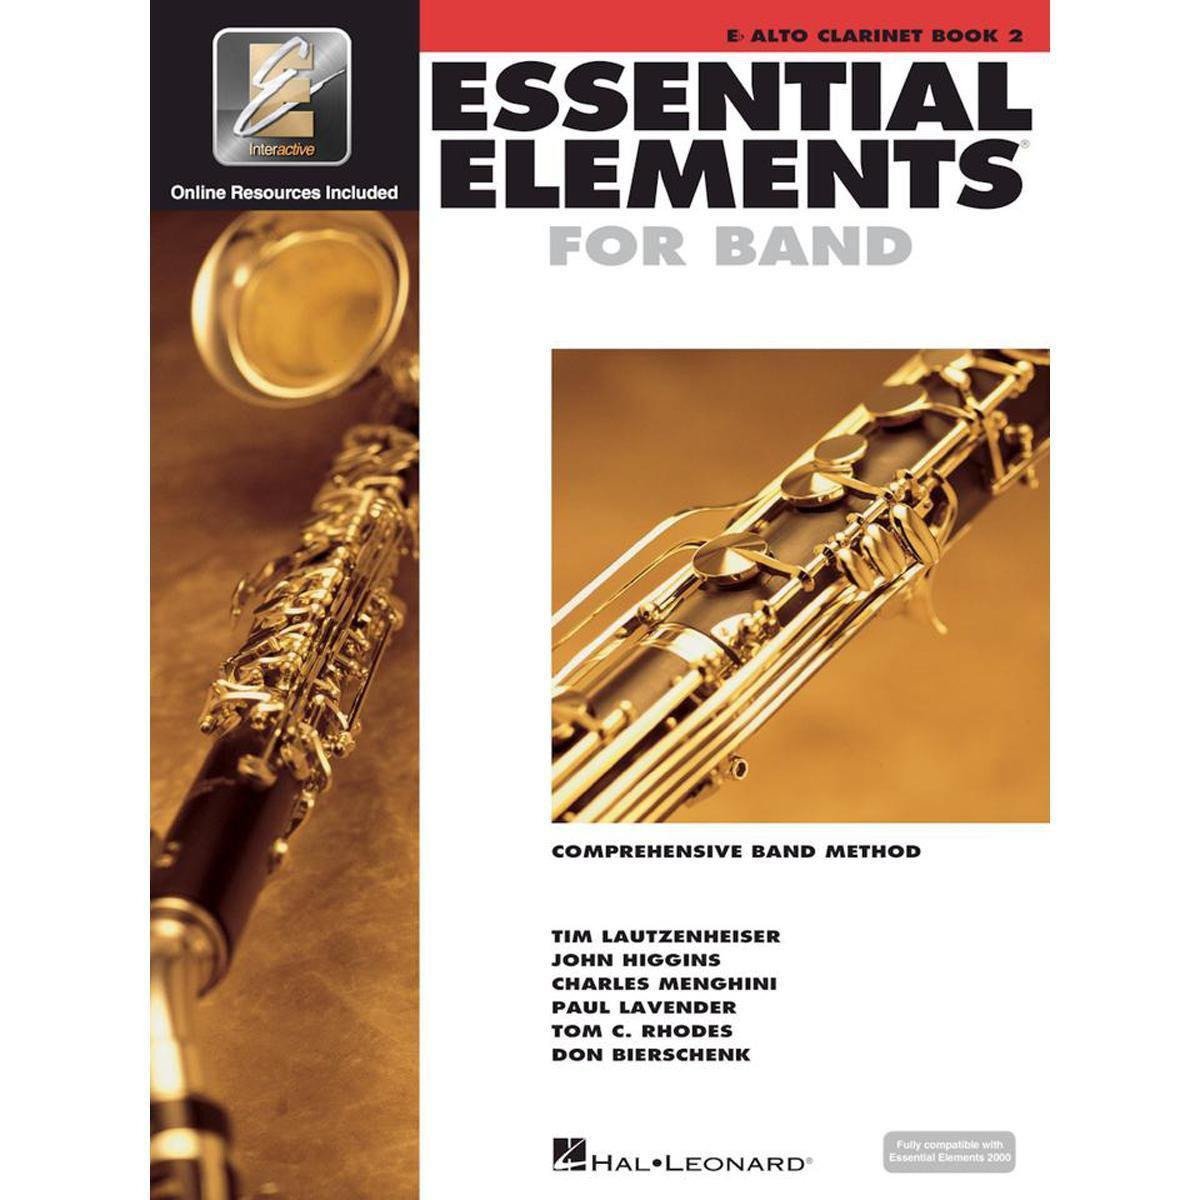 Essential Elements for Band Book 2-Eb Alto Clarinet-Andy's Music